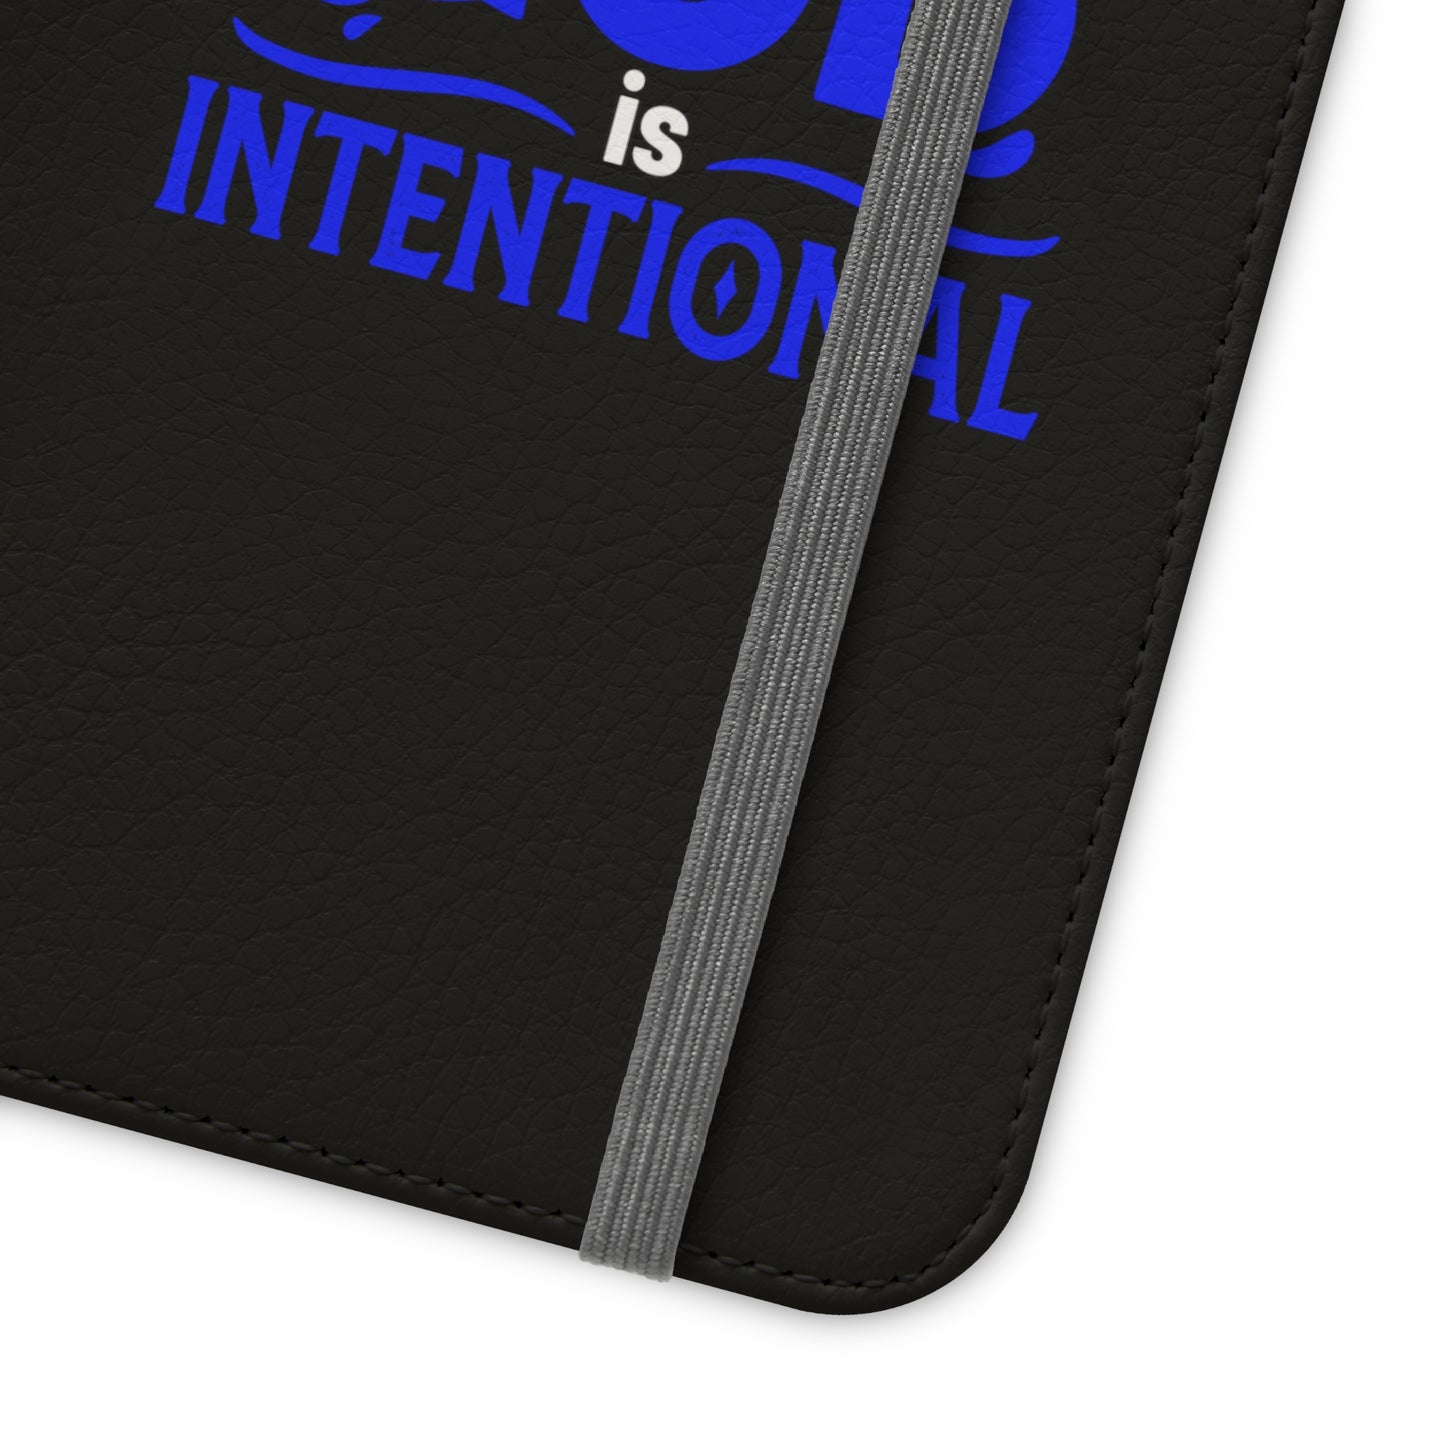 My God Is Intentional Phone Flip Cases